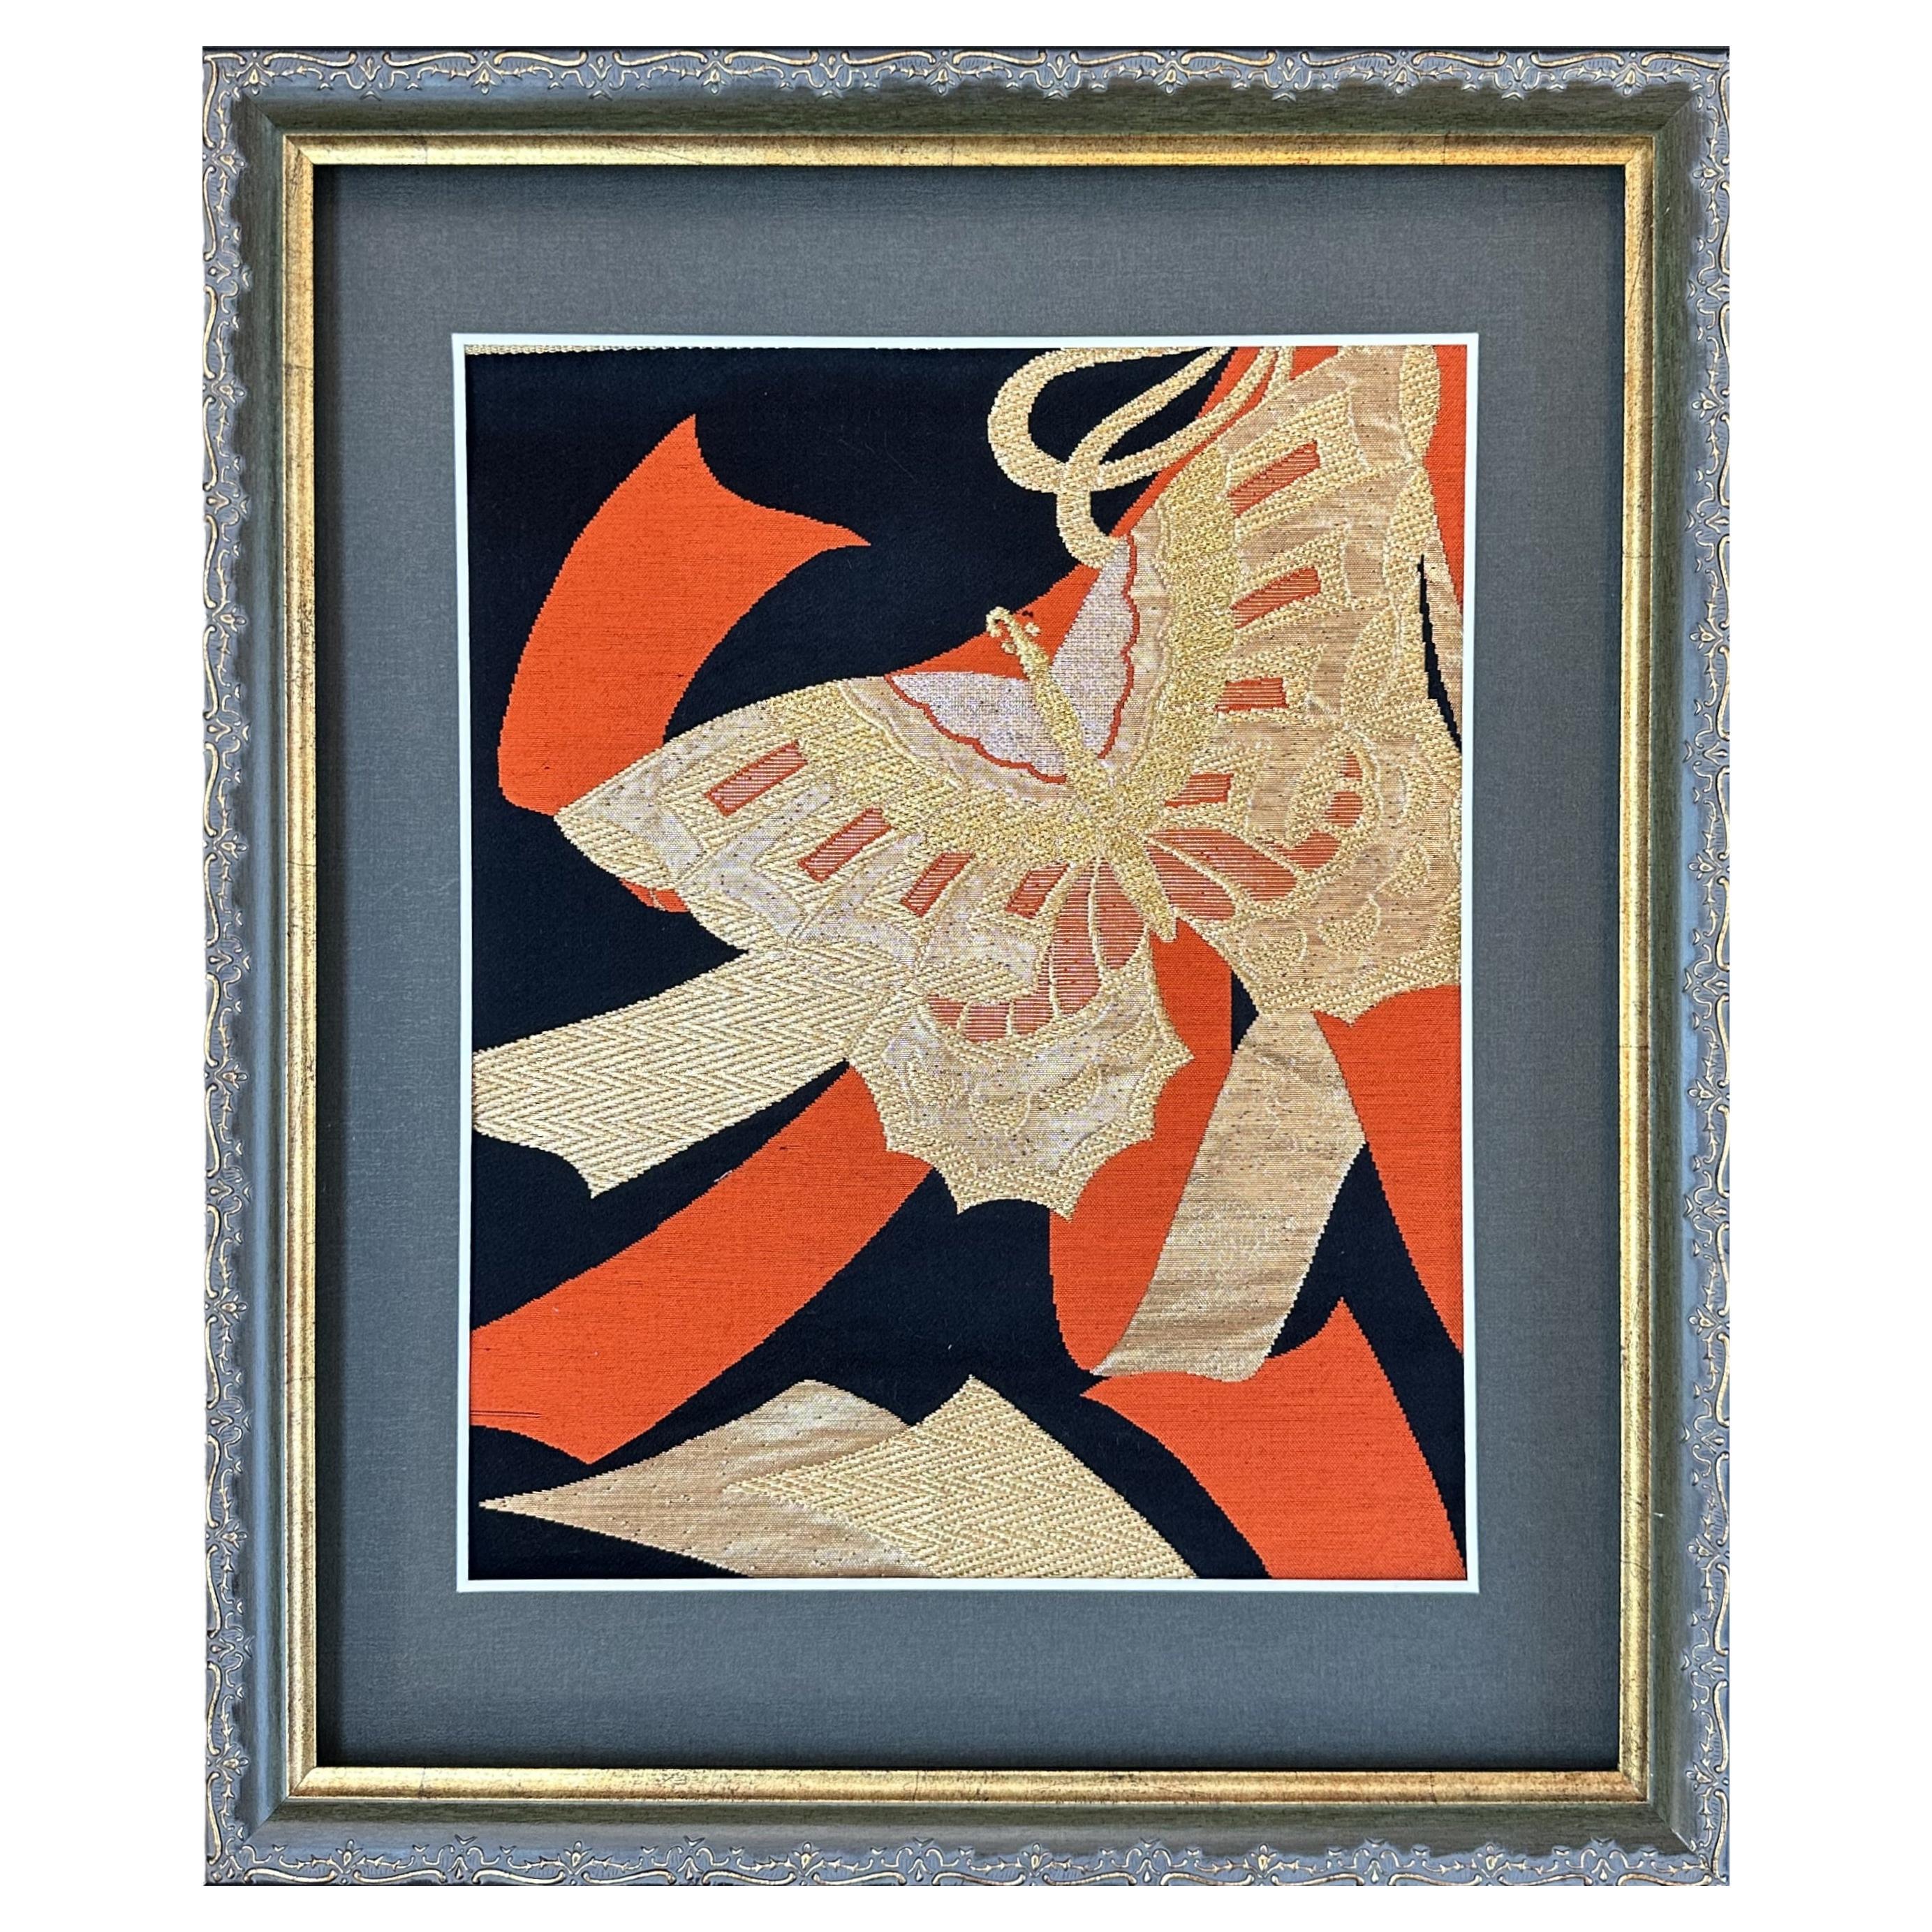 Kimono Art / Japanese Wall Art / “Butterfly of Fortune” For Sale